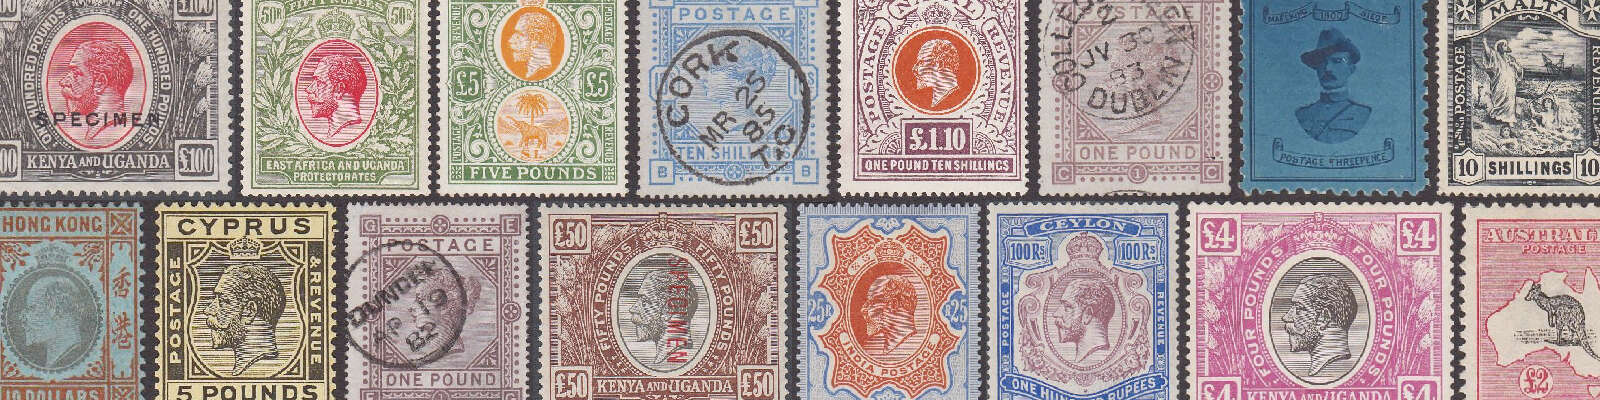 Stamp Auctions UK